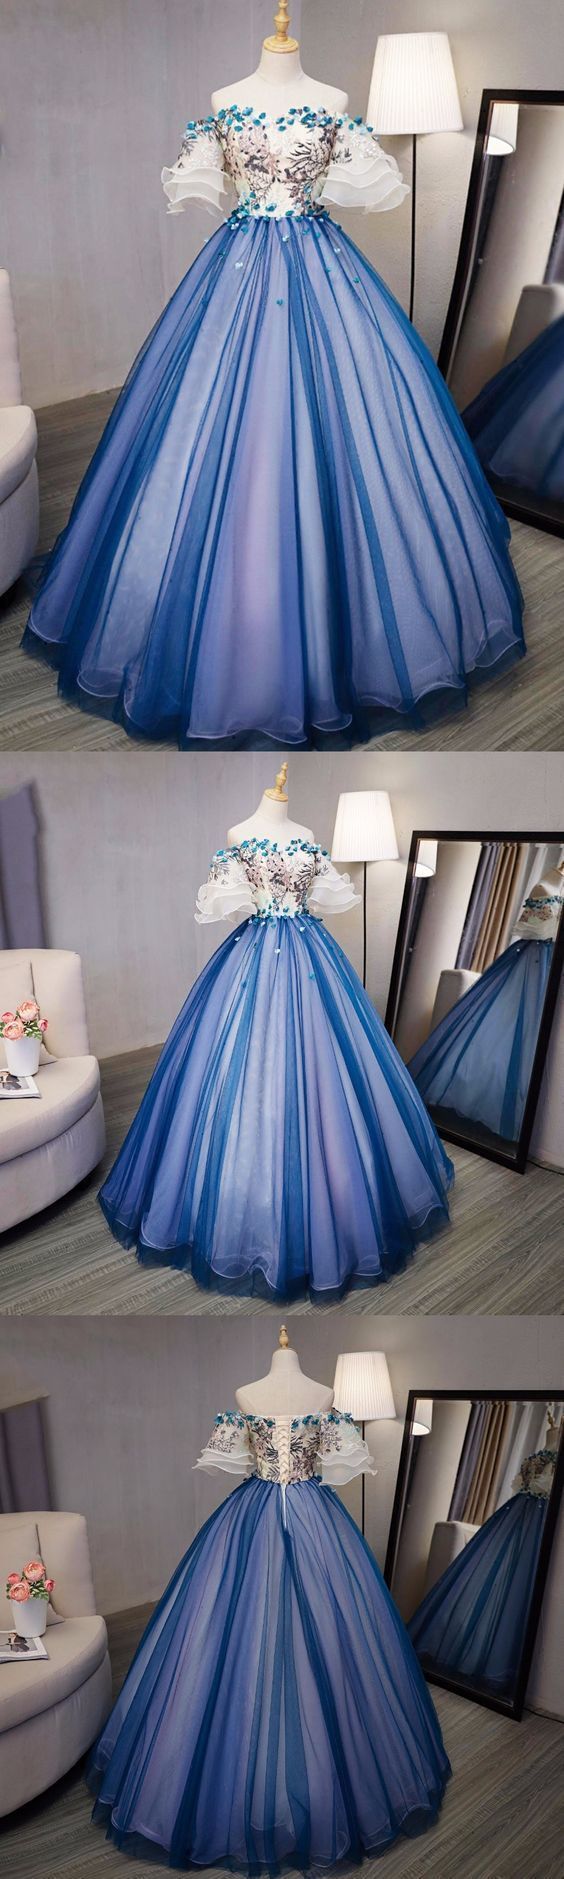 Ball Gown Prom Dresses Royal Blue And Ivory Hand-made Flower Prom Dress/evening M7988